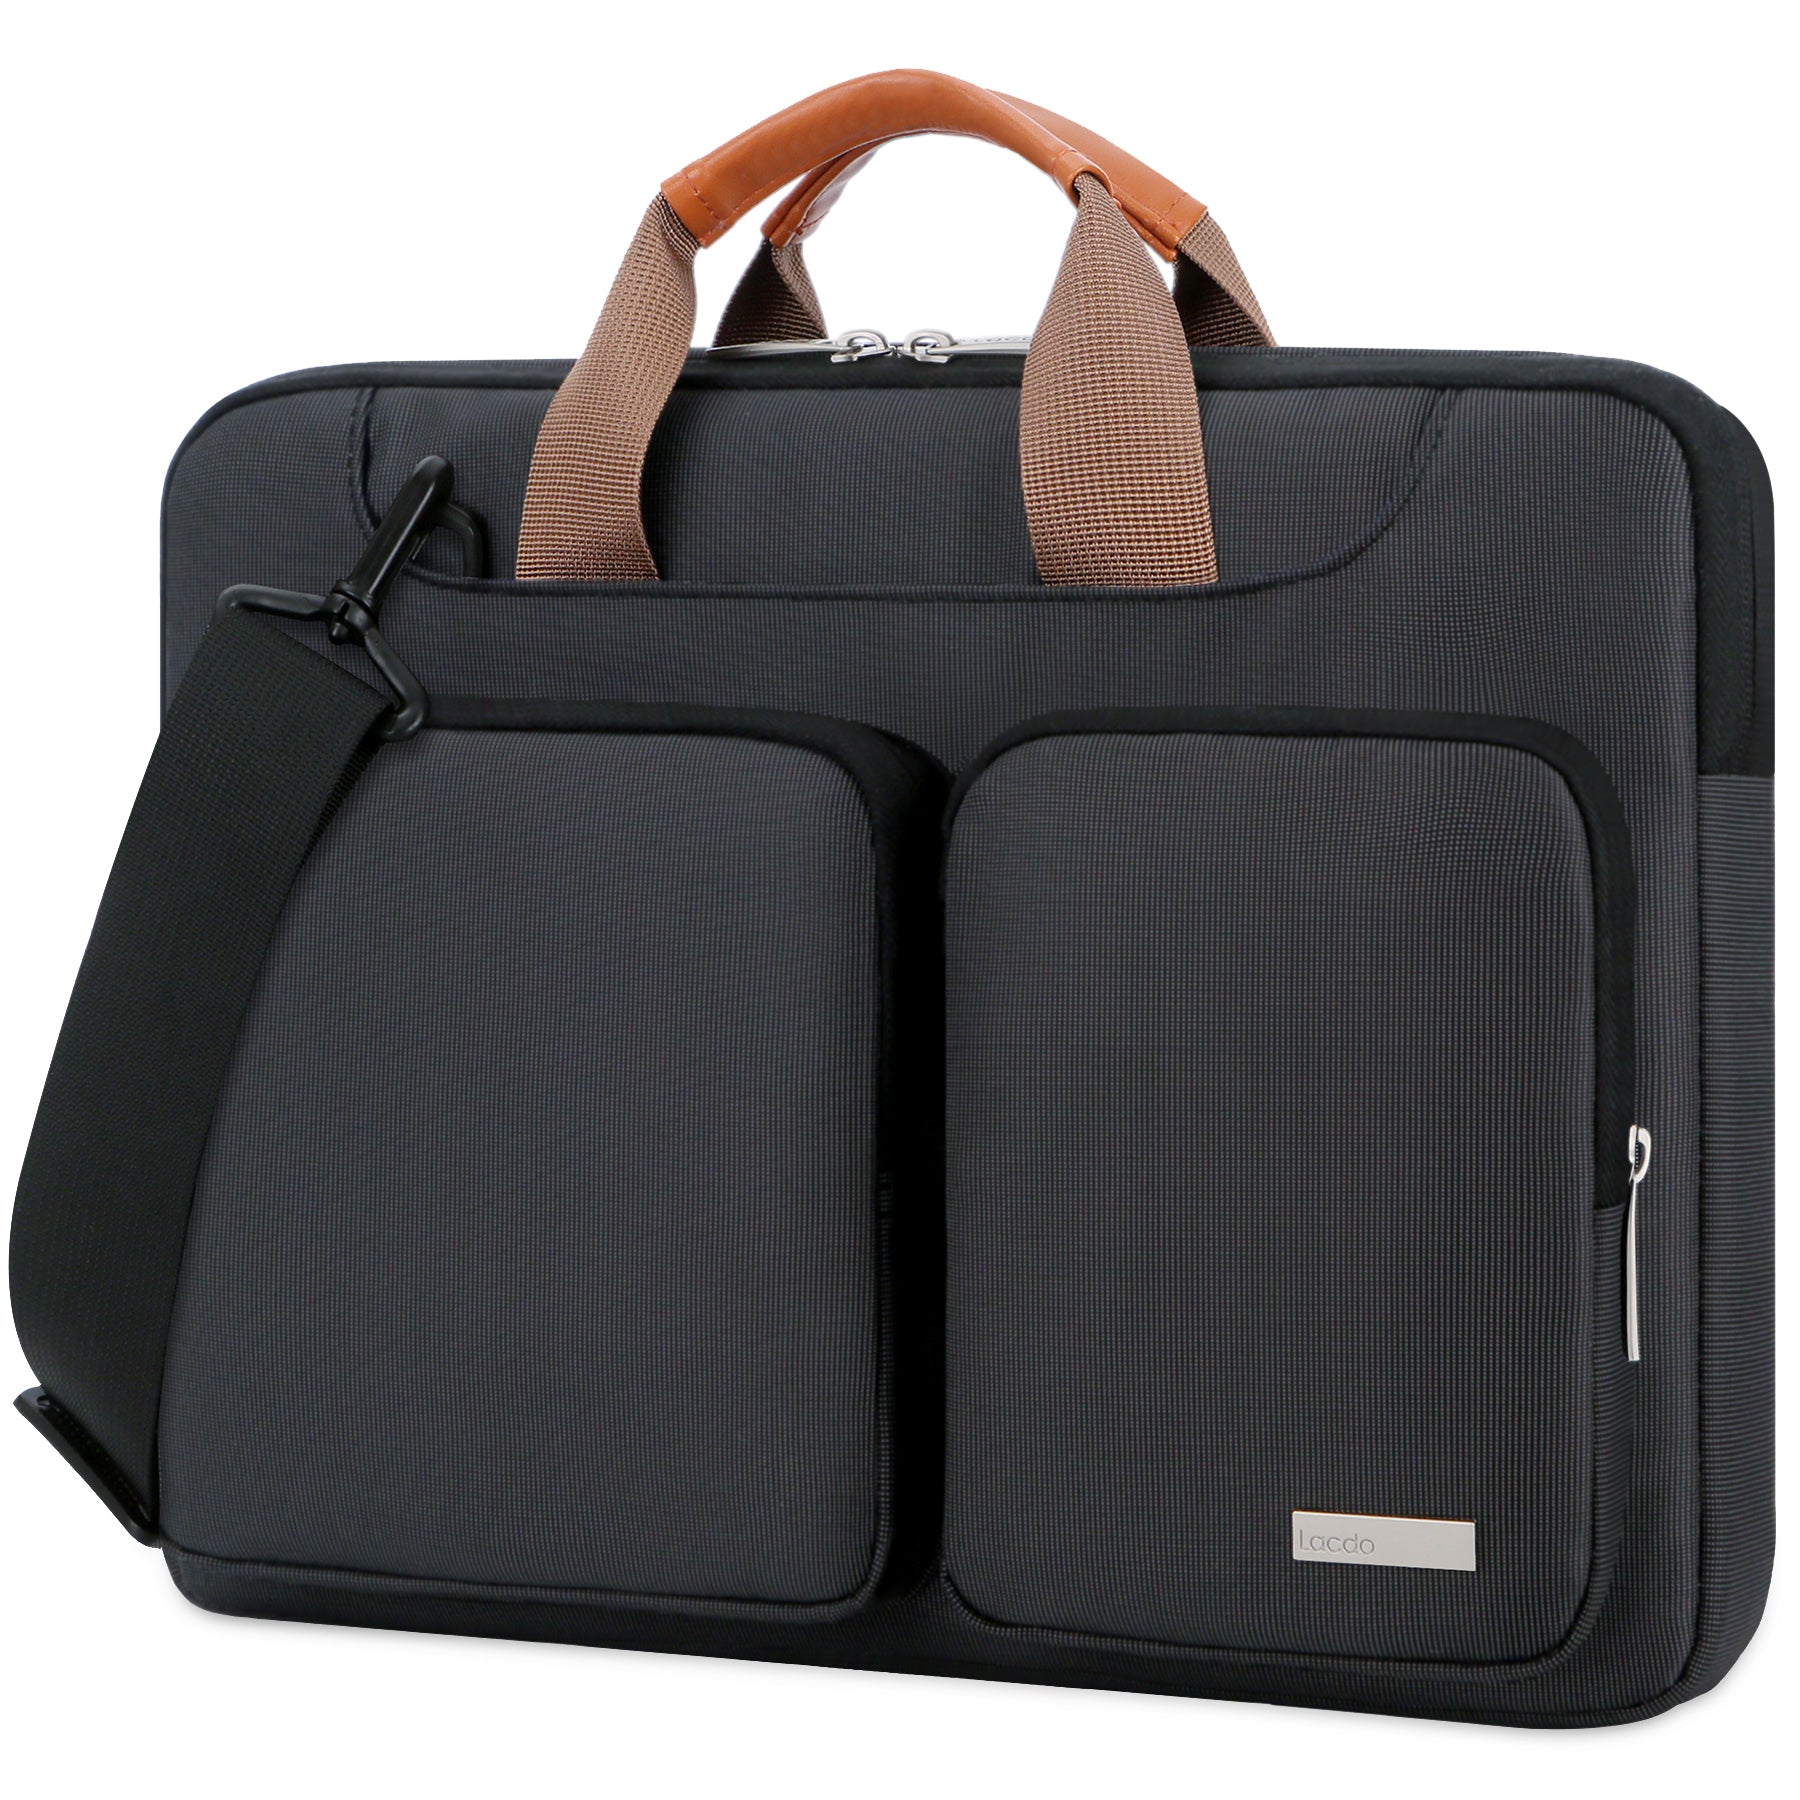 Comfyable Laptop Sleeve Fit for All 13-13.3 Inch MBP/MBA & 14-in MBP 2